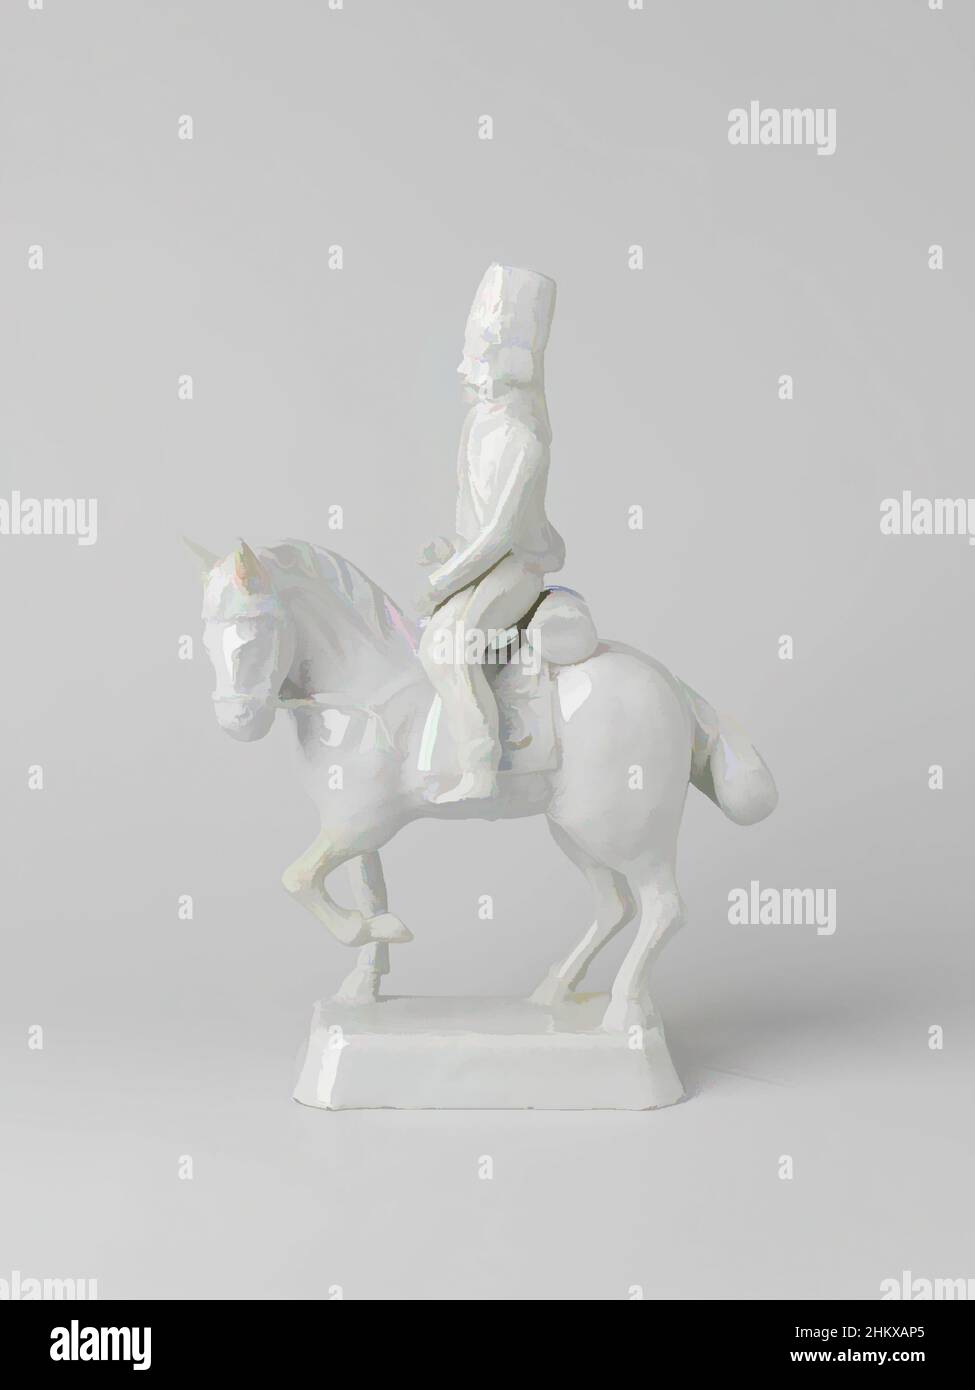 Art inspired by Horse with rider, Horseman of undecorated faience. The horse stands on a rectangular base and the rider sits loose on it. The rider wears a bereb hat and a German uniform from the second half of the 18th century. The horse has its left foreleg raised. The rider is, Classic works modernized by Artotop with a splash of modernity. Shapes, color and value, eye-catching visual impact on art. Emotions through freedom of artworks in a contemporary way. A timeless message pursuing a wildly creative new direction. Artists turning to the digital medium and creating the Artotop NFT Stock Photo